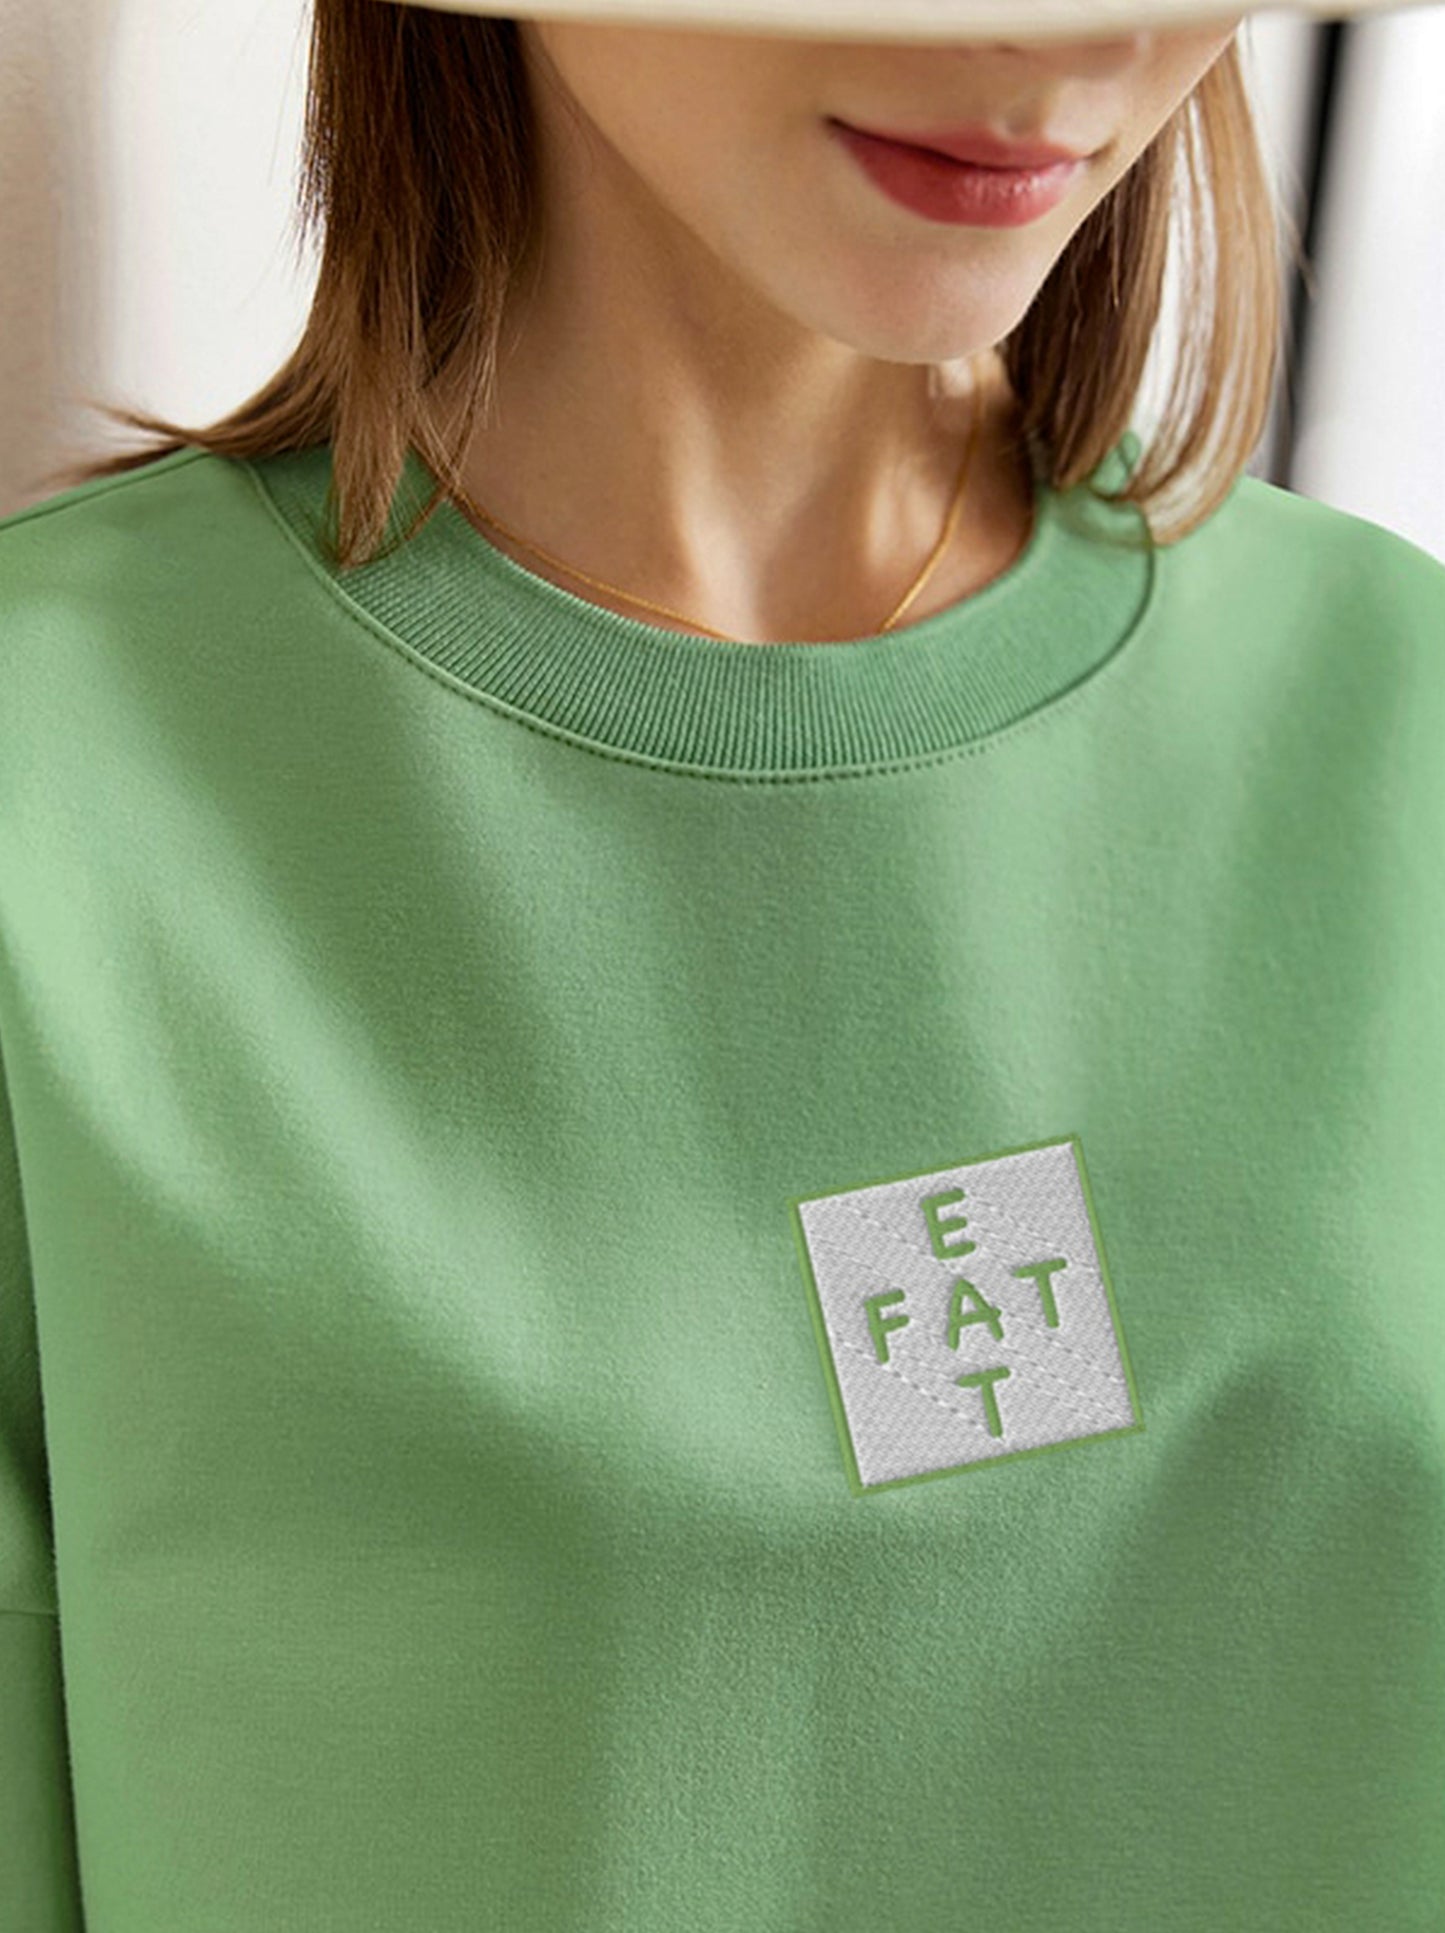 Amii Angel Classic Collection : Eat Fat Sweater Hight Quality Stitched Logo (Organic Cotton)